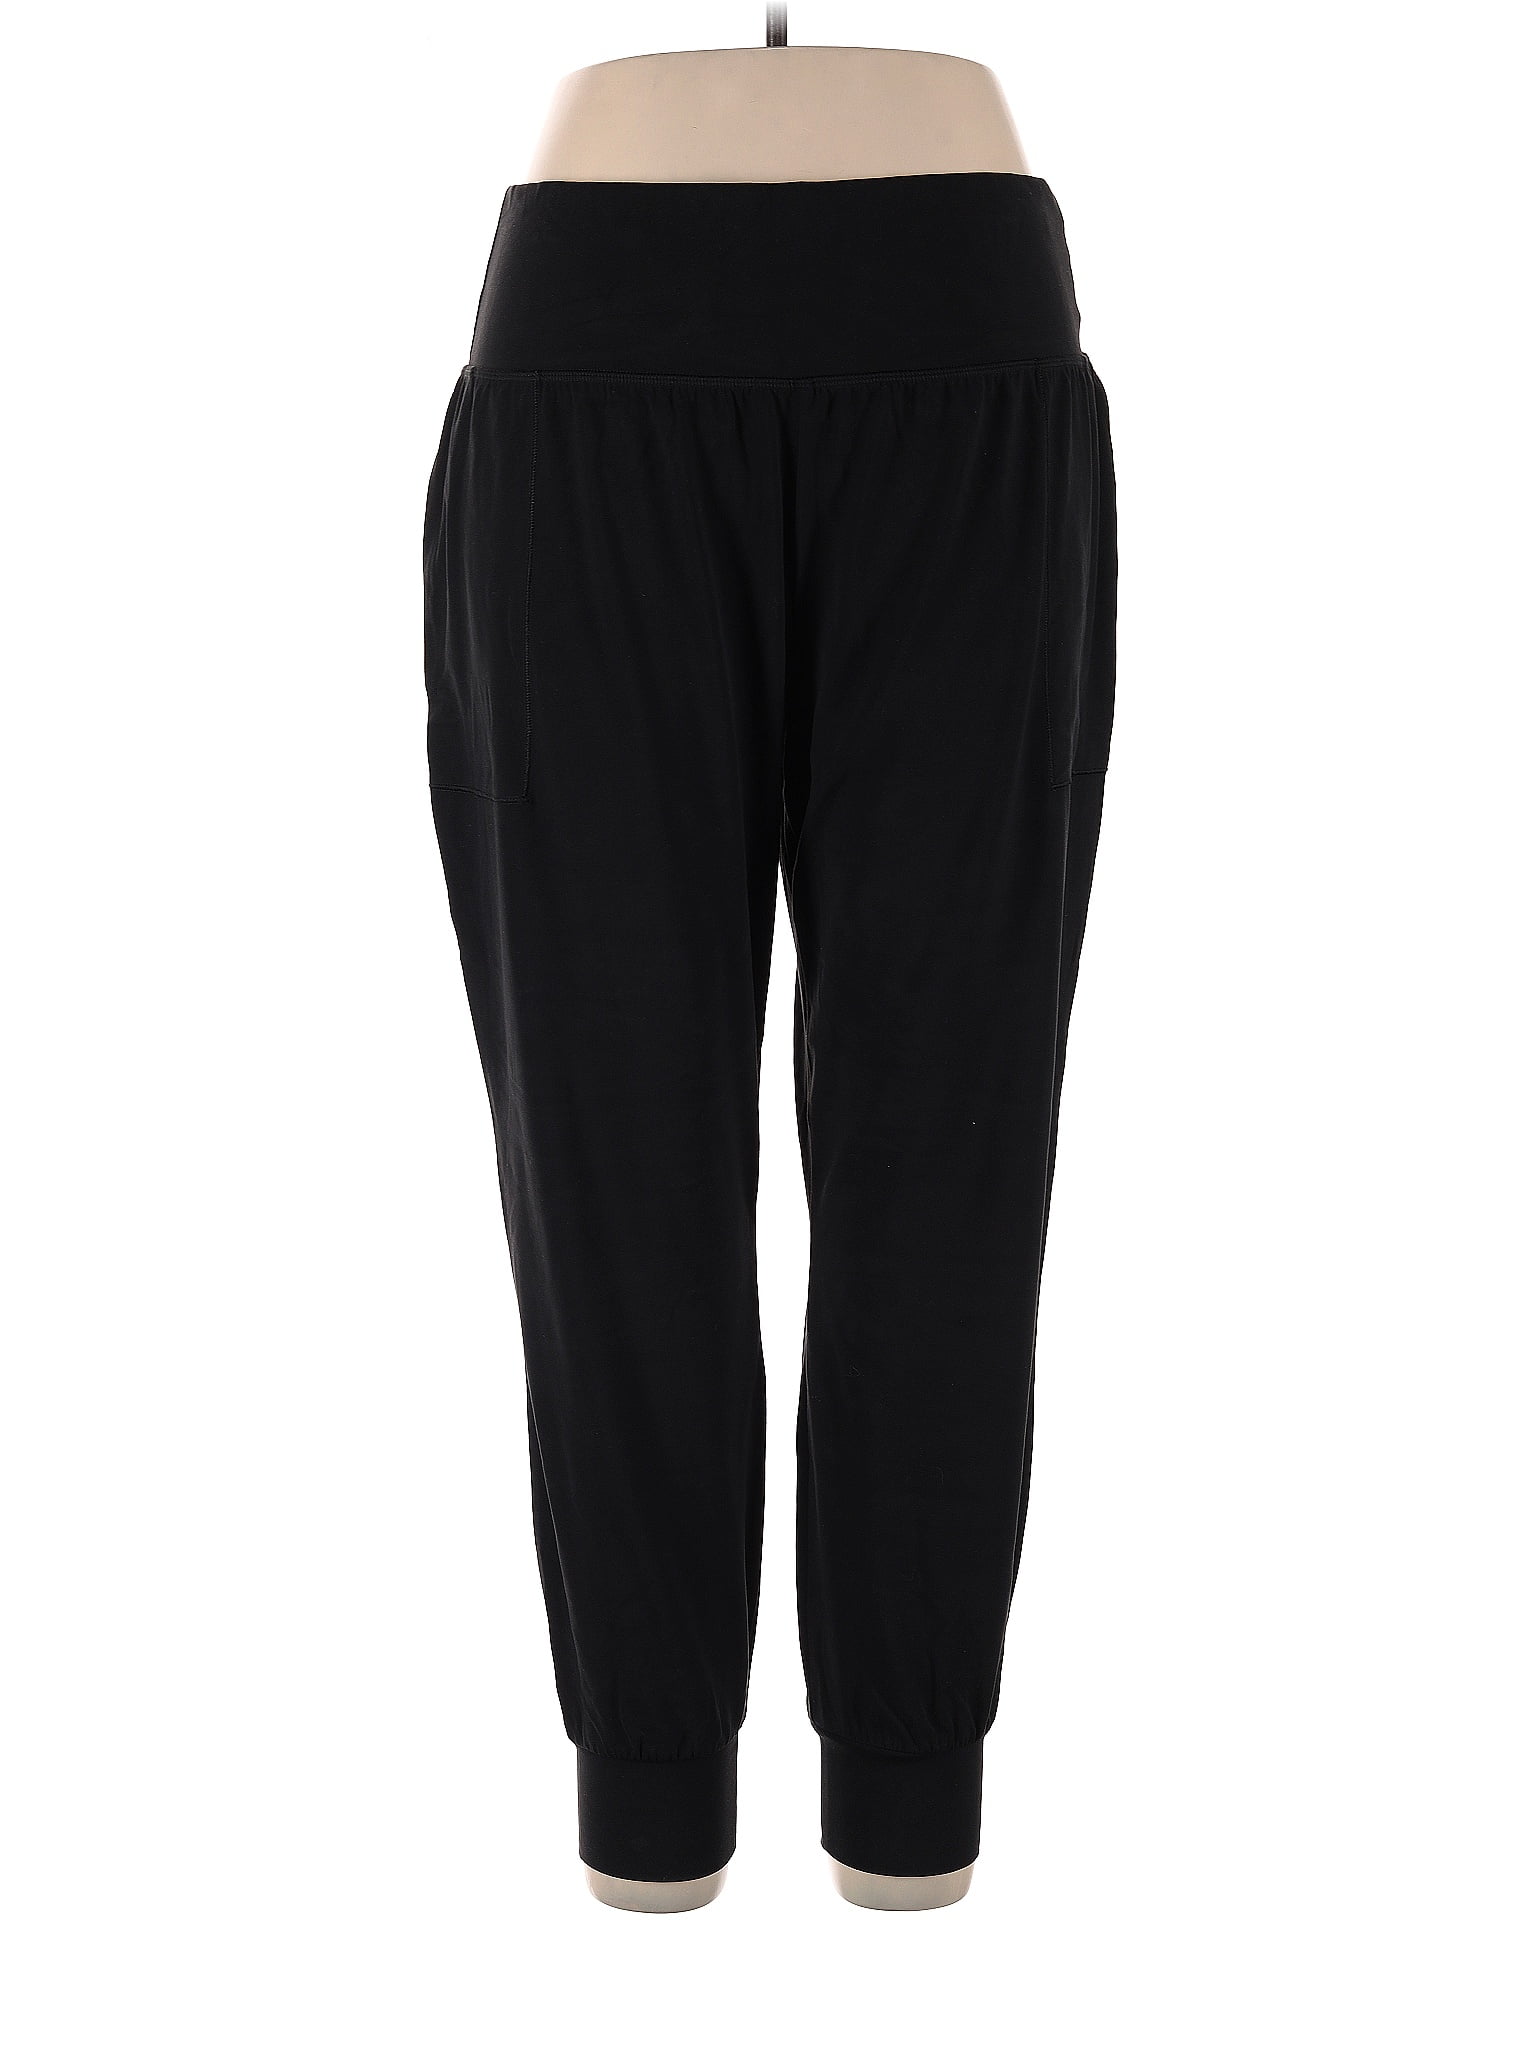 Zyia Active Black Active Pants Size 12 - 61% off